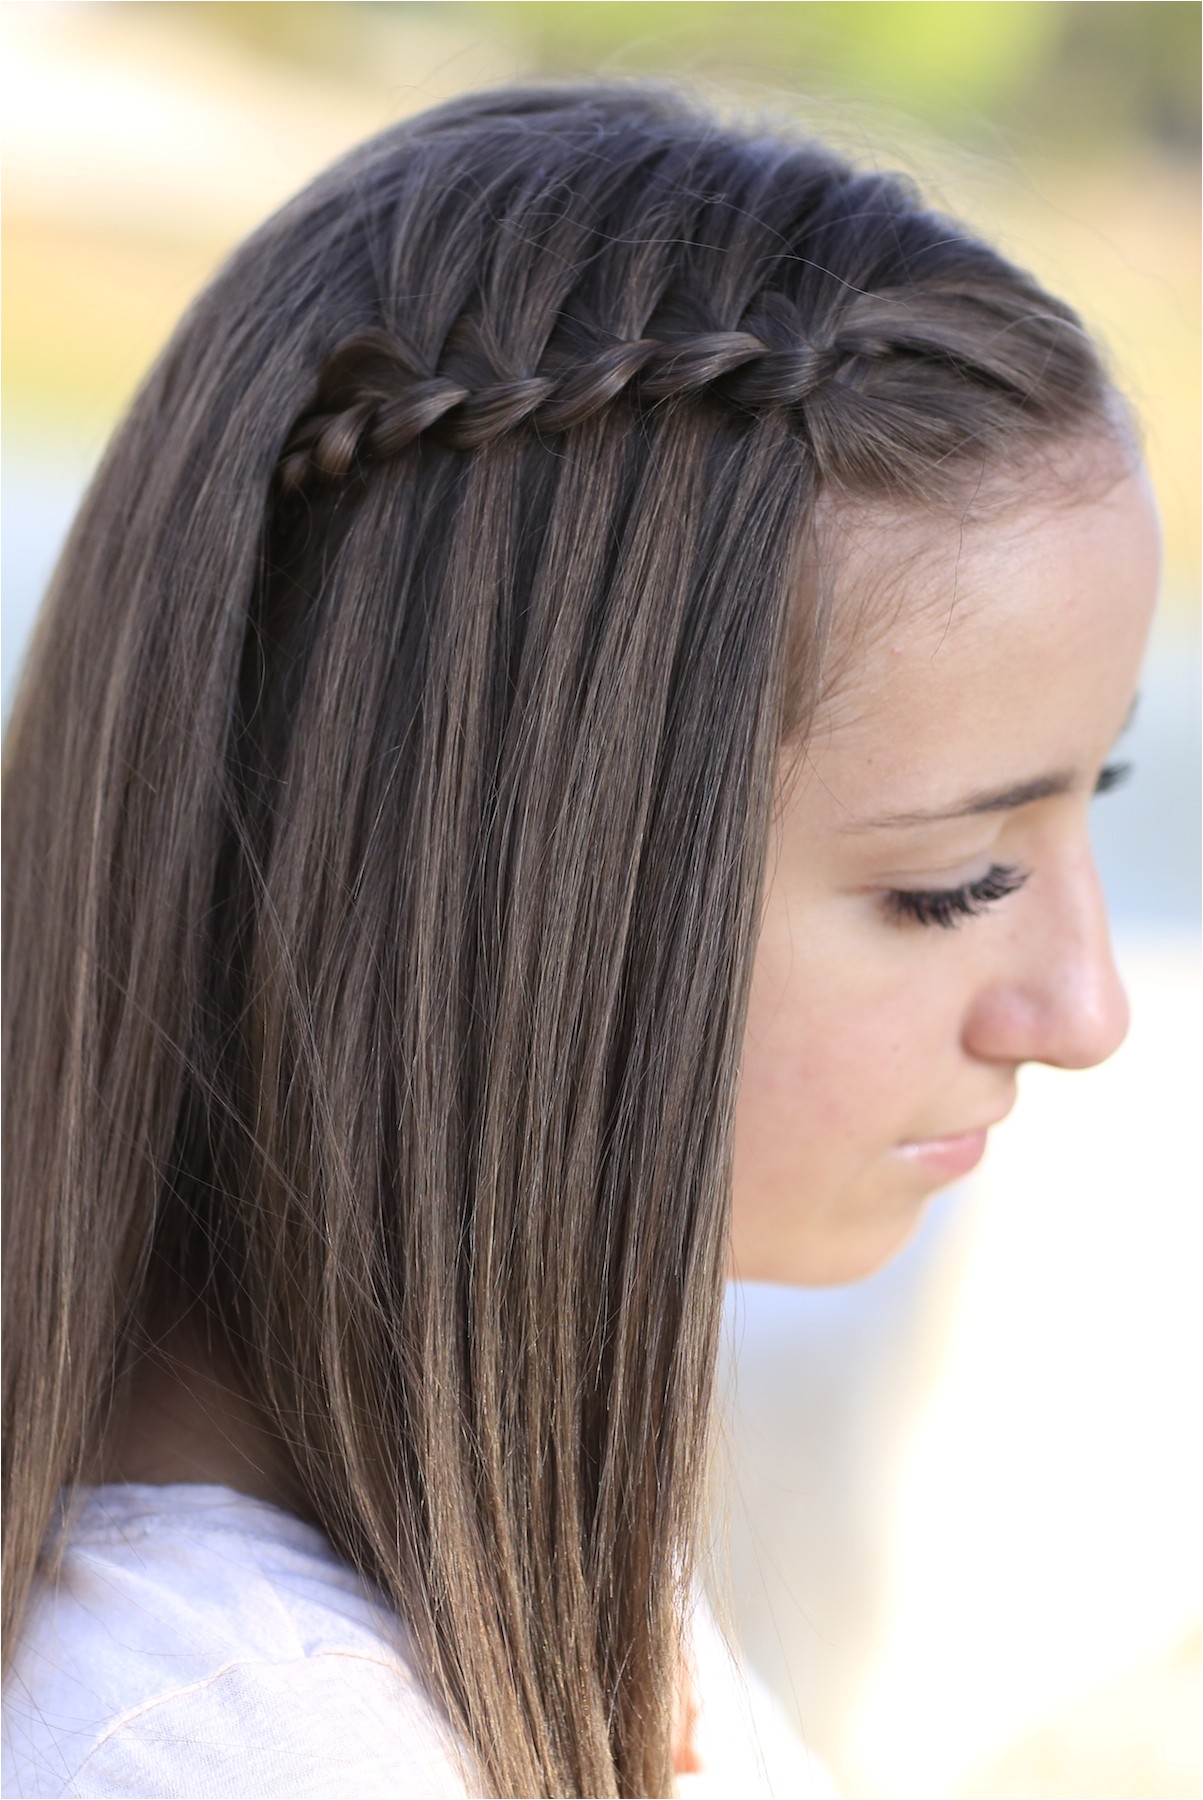 Easy Hairstyles for 13 Year Olds Cute Hairstyles for 4 Year Olds